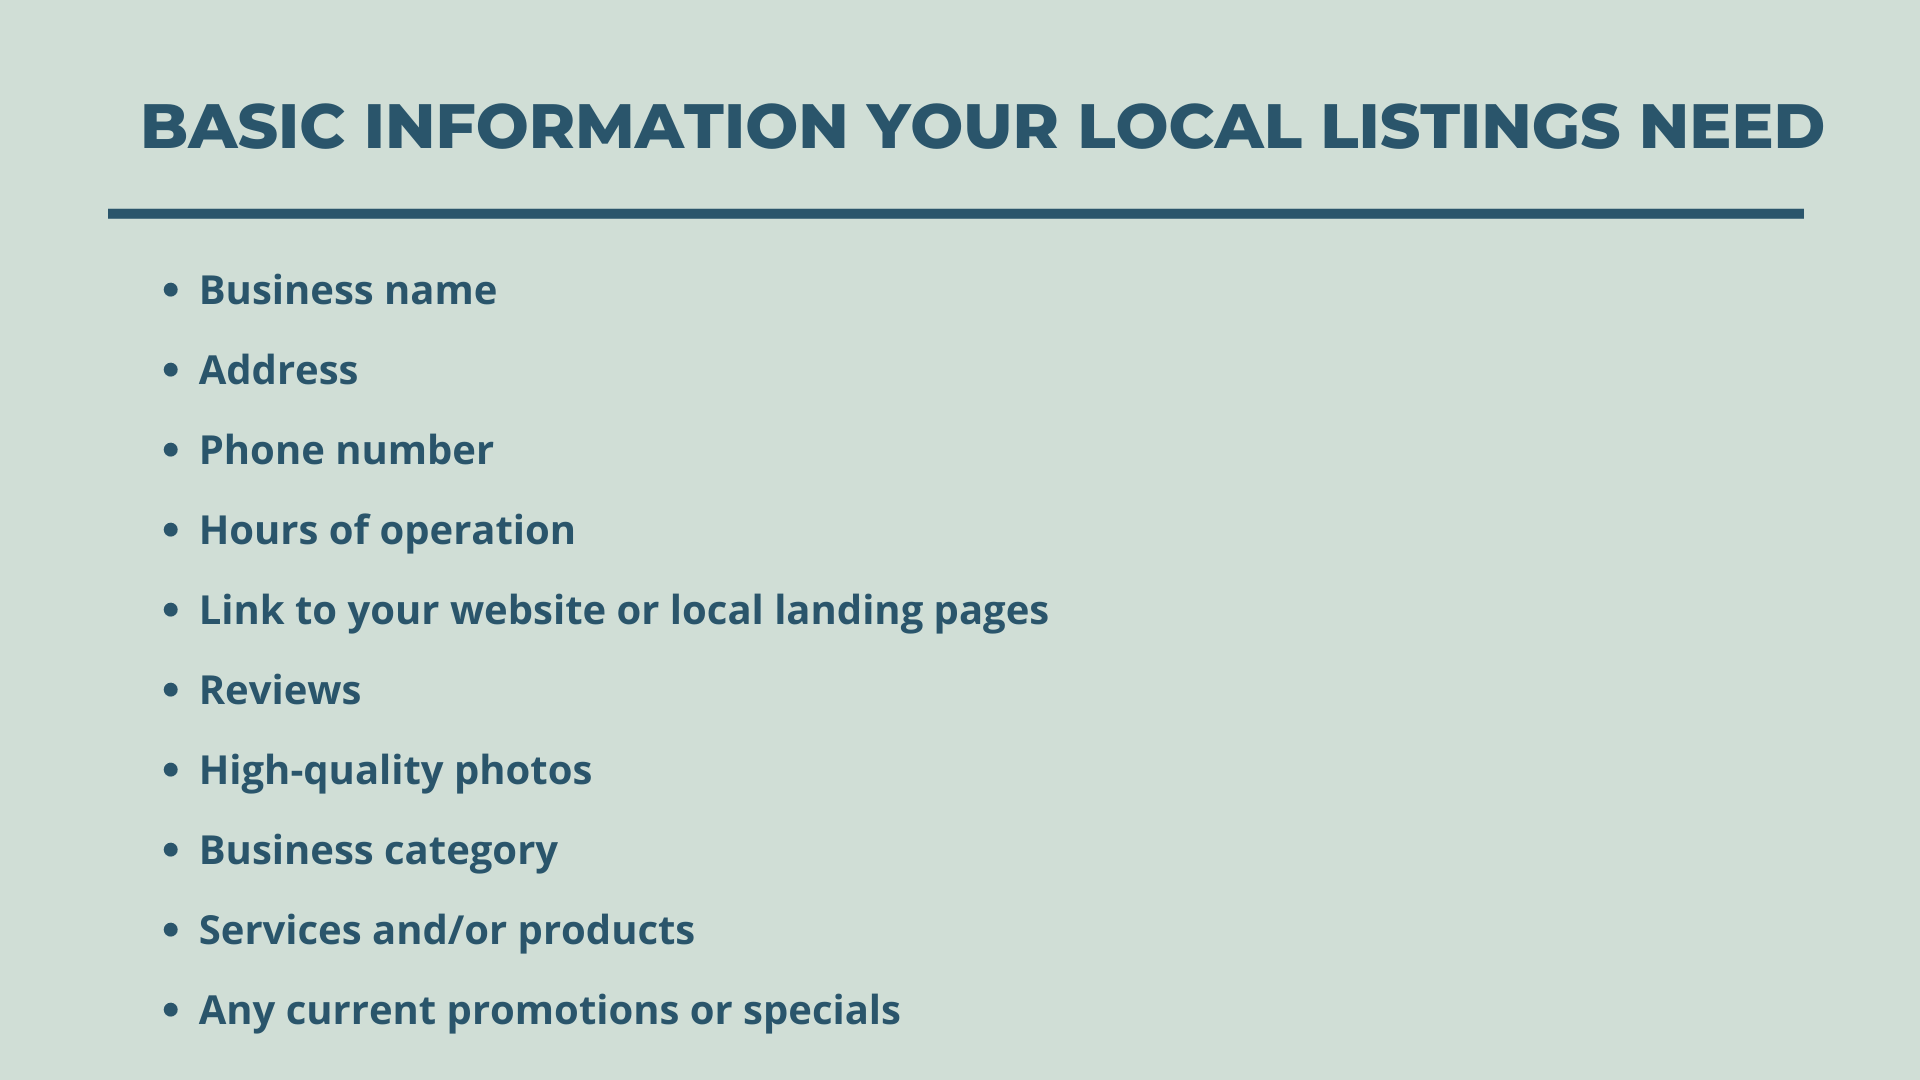 List of basic information your local listings need in navy blue bullet point text on a light gray and green background